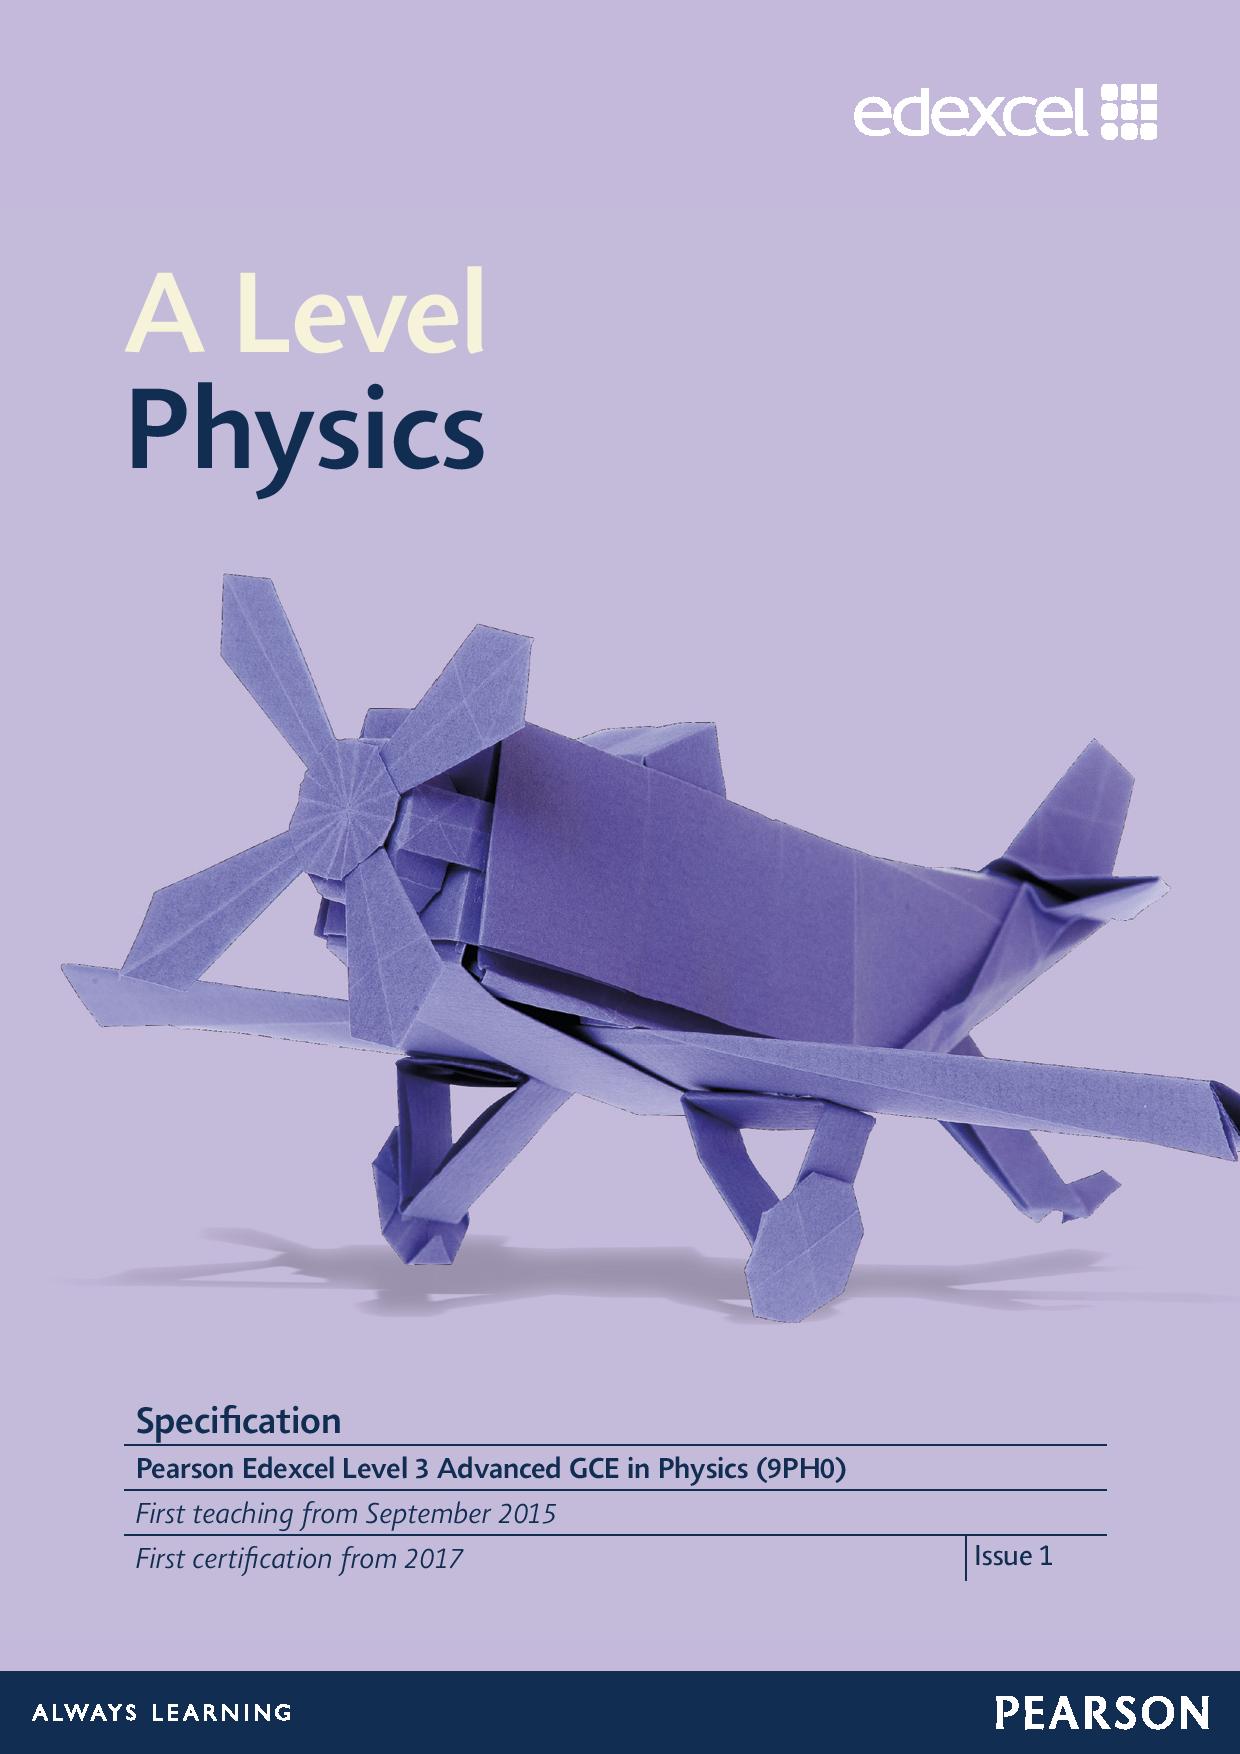 Link to Edexcel A level Physics specification page